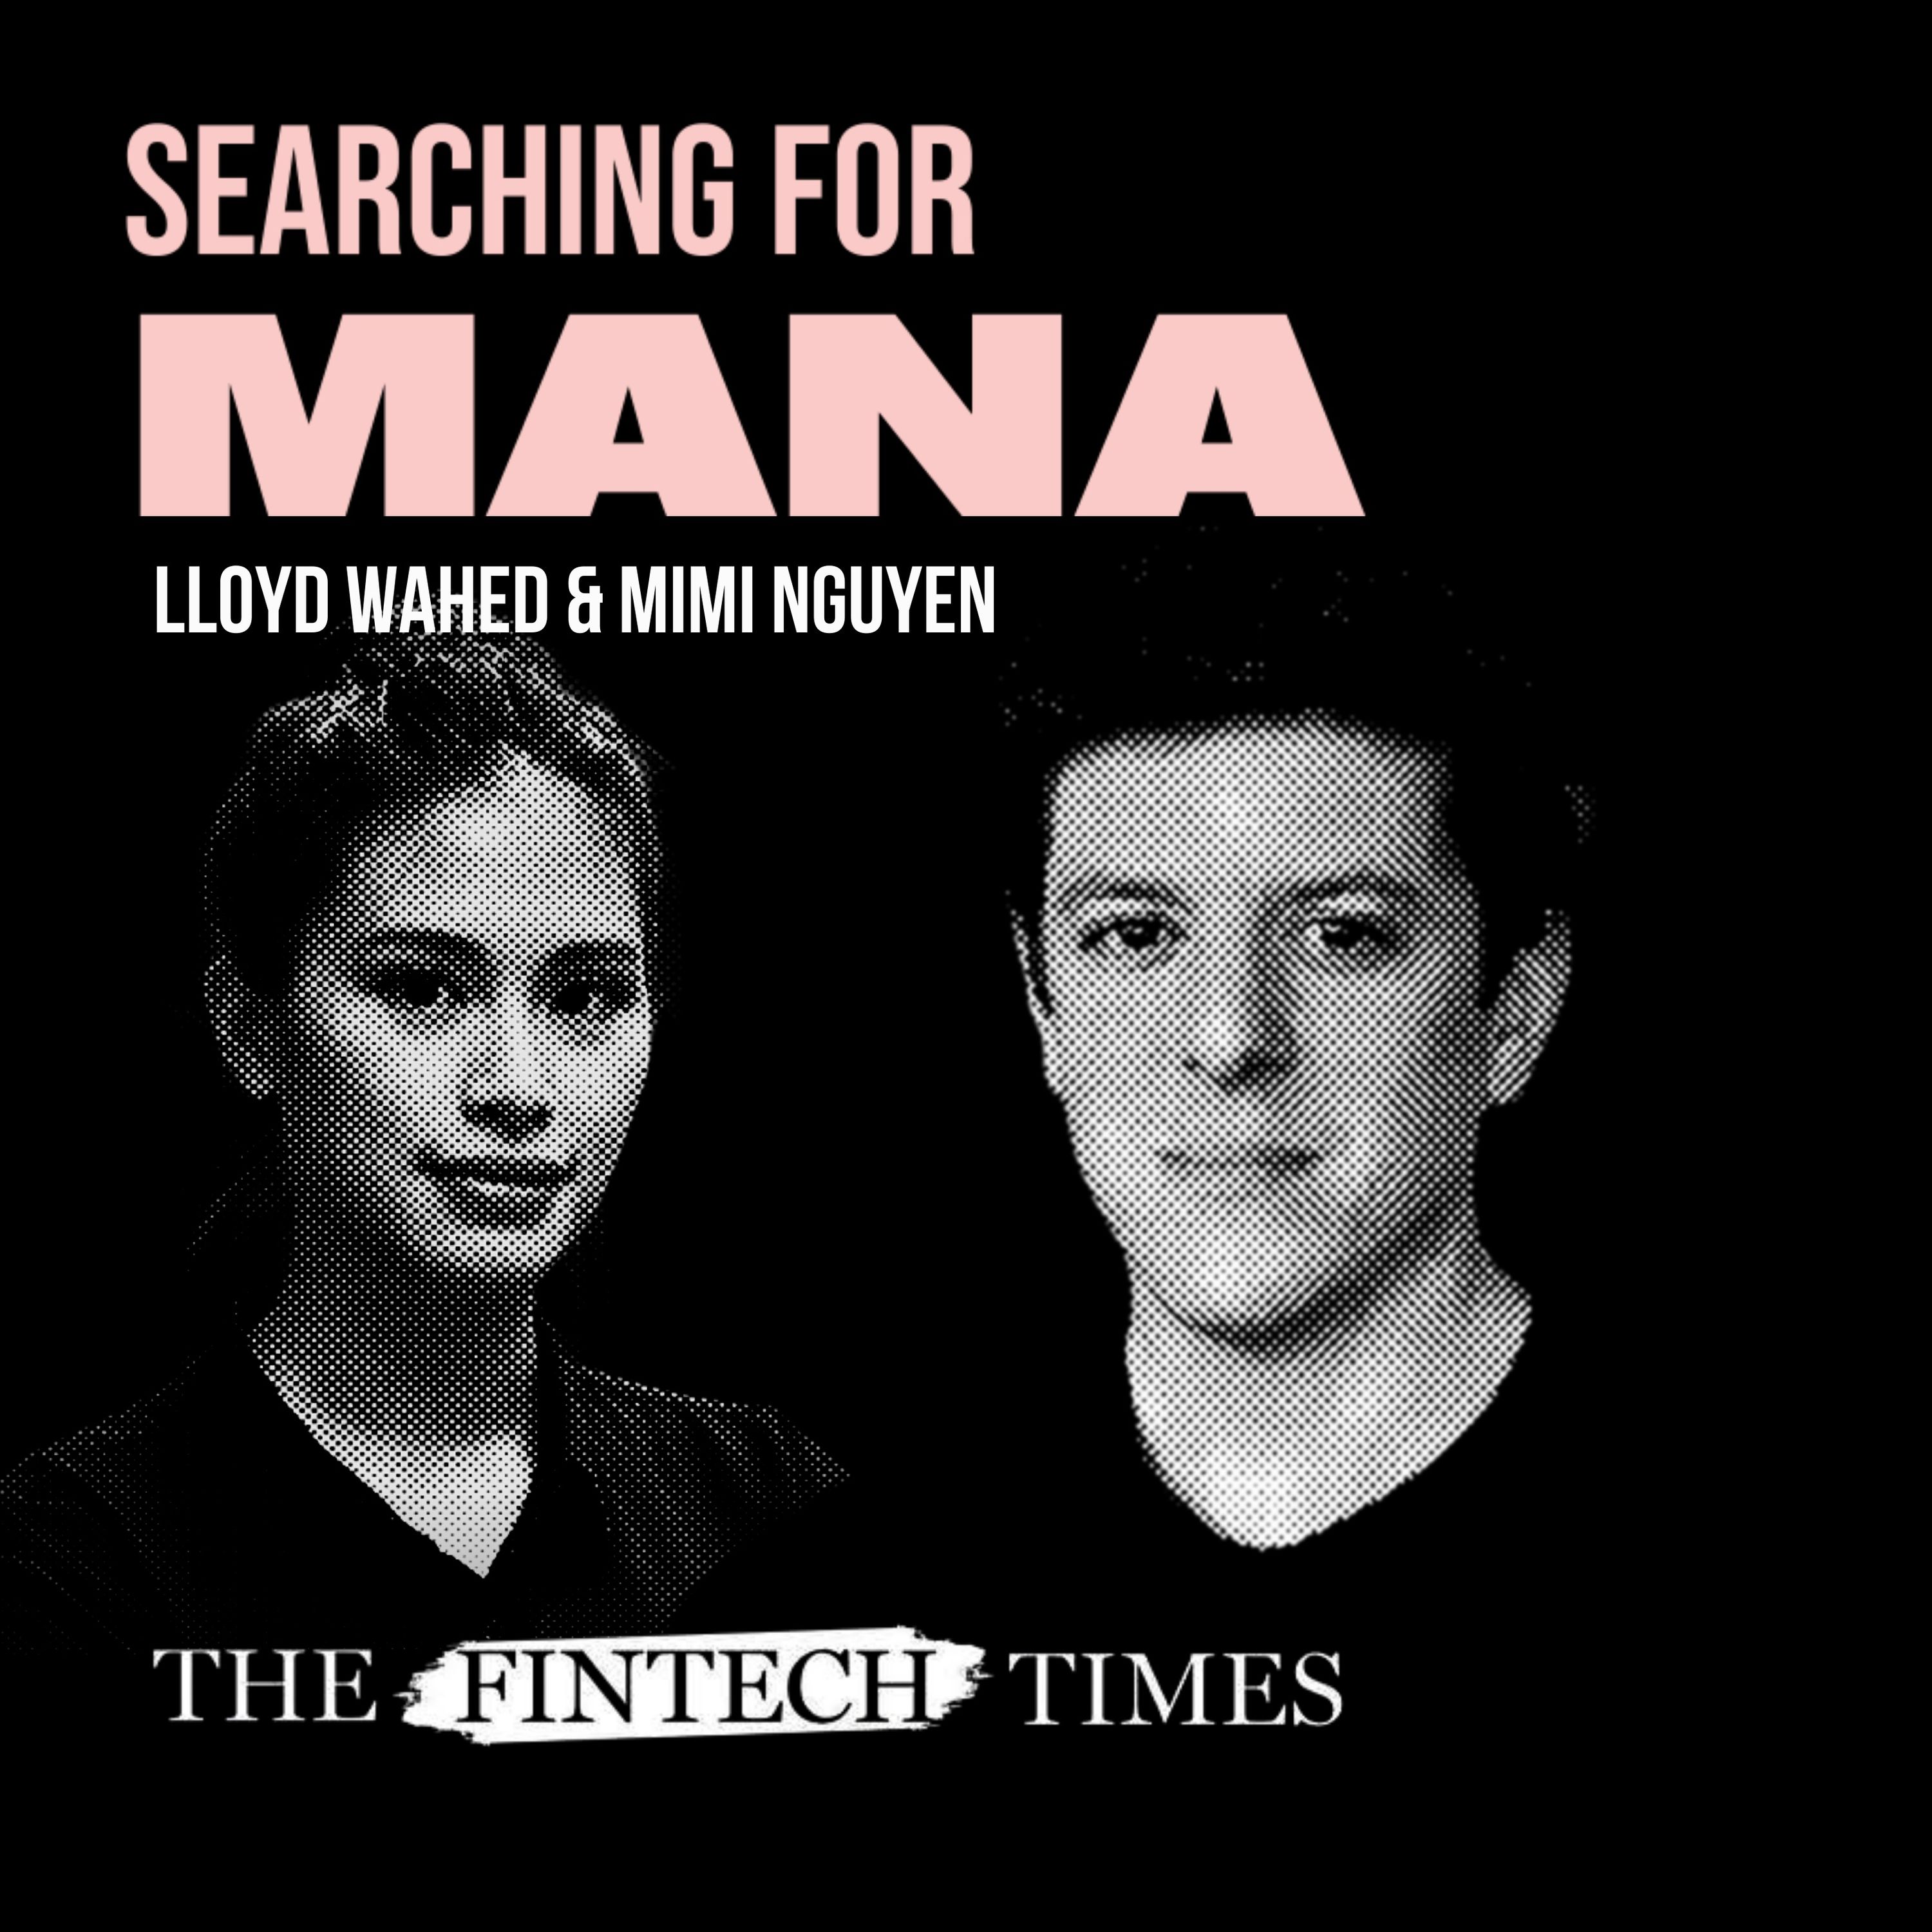 Searching for Mana with Lloyd Wahed